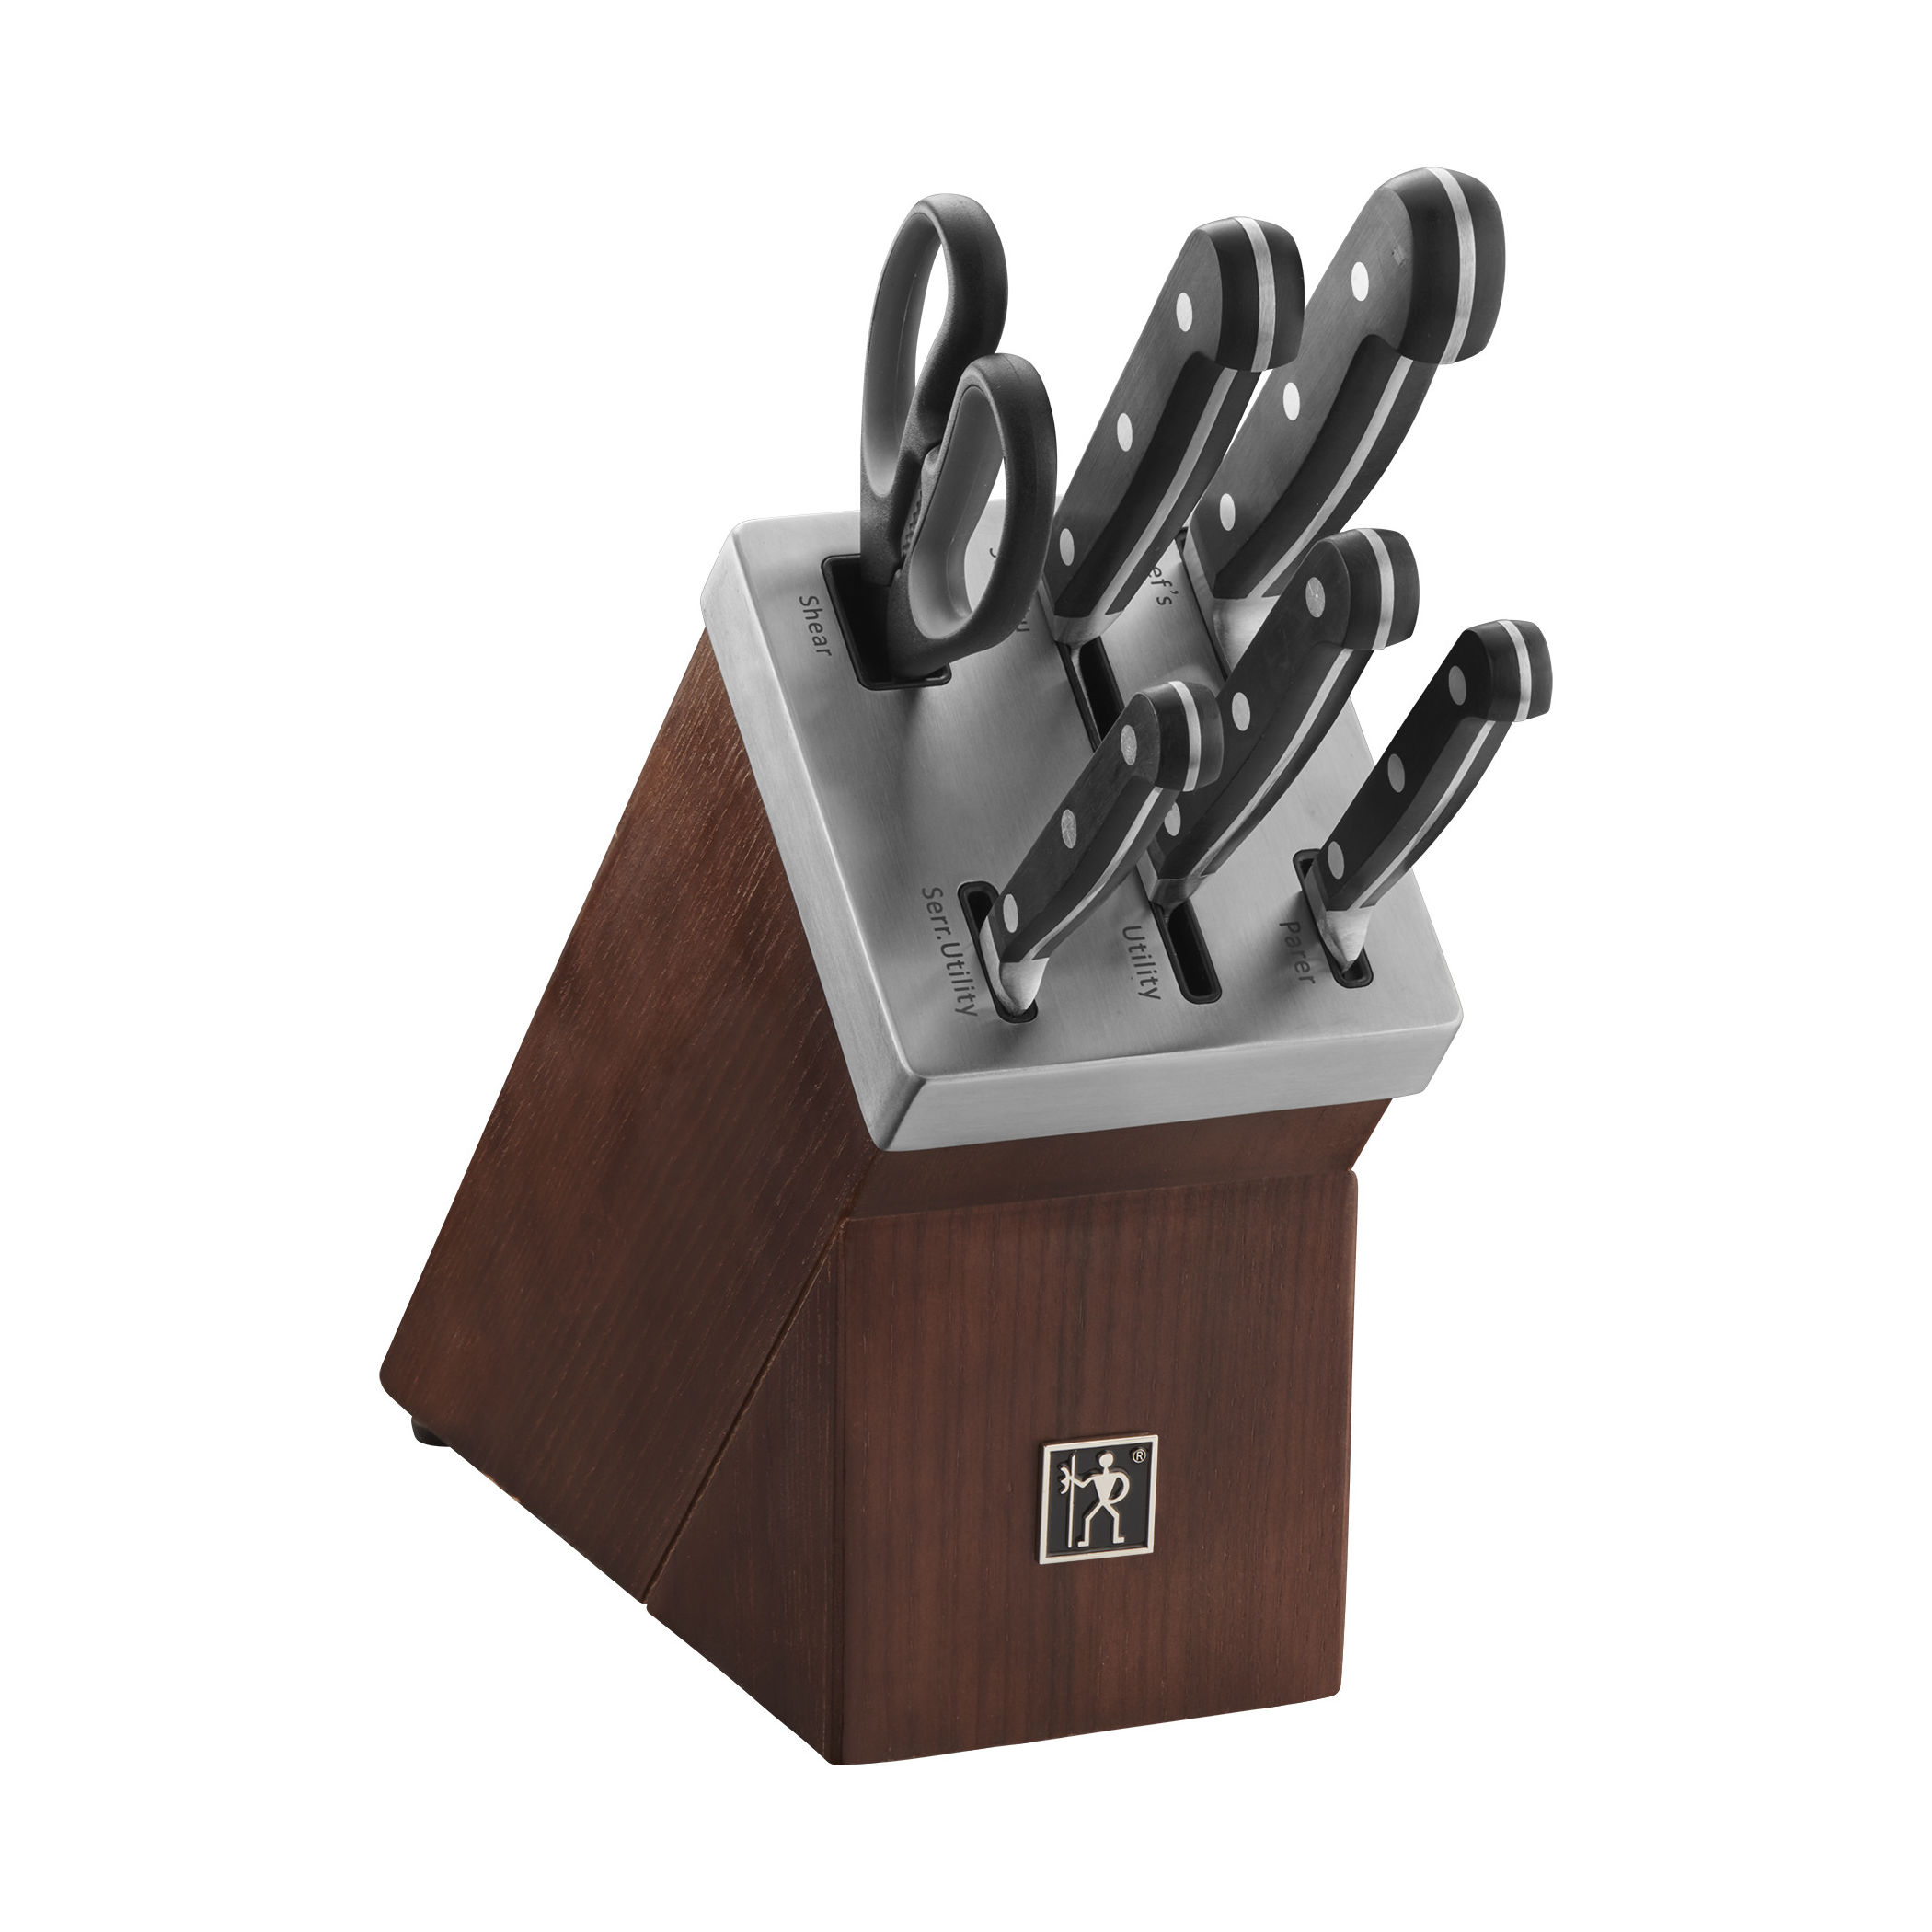 Zwilling J.A. Henckels International CLASSIC 7-pc Knife Block Set -  Stainless Steel Cutlery Set with Hardwood Block - Dishwasher Safe - Made in  Spain in the Cutlery department at